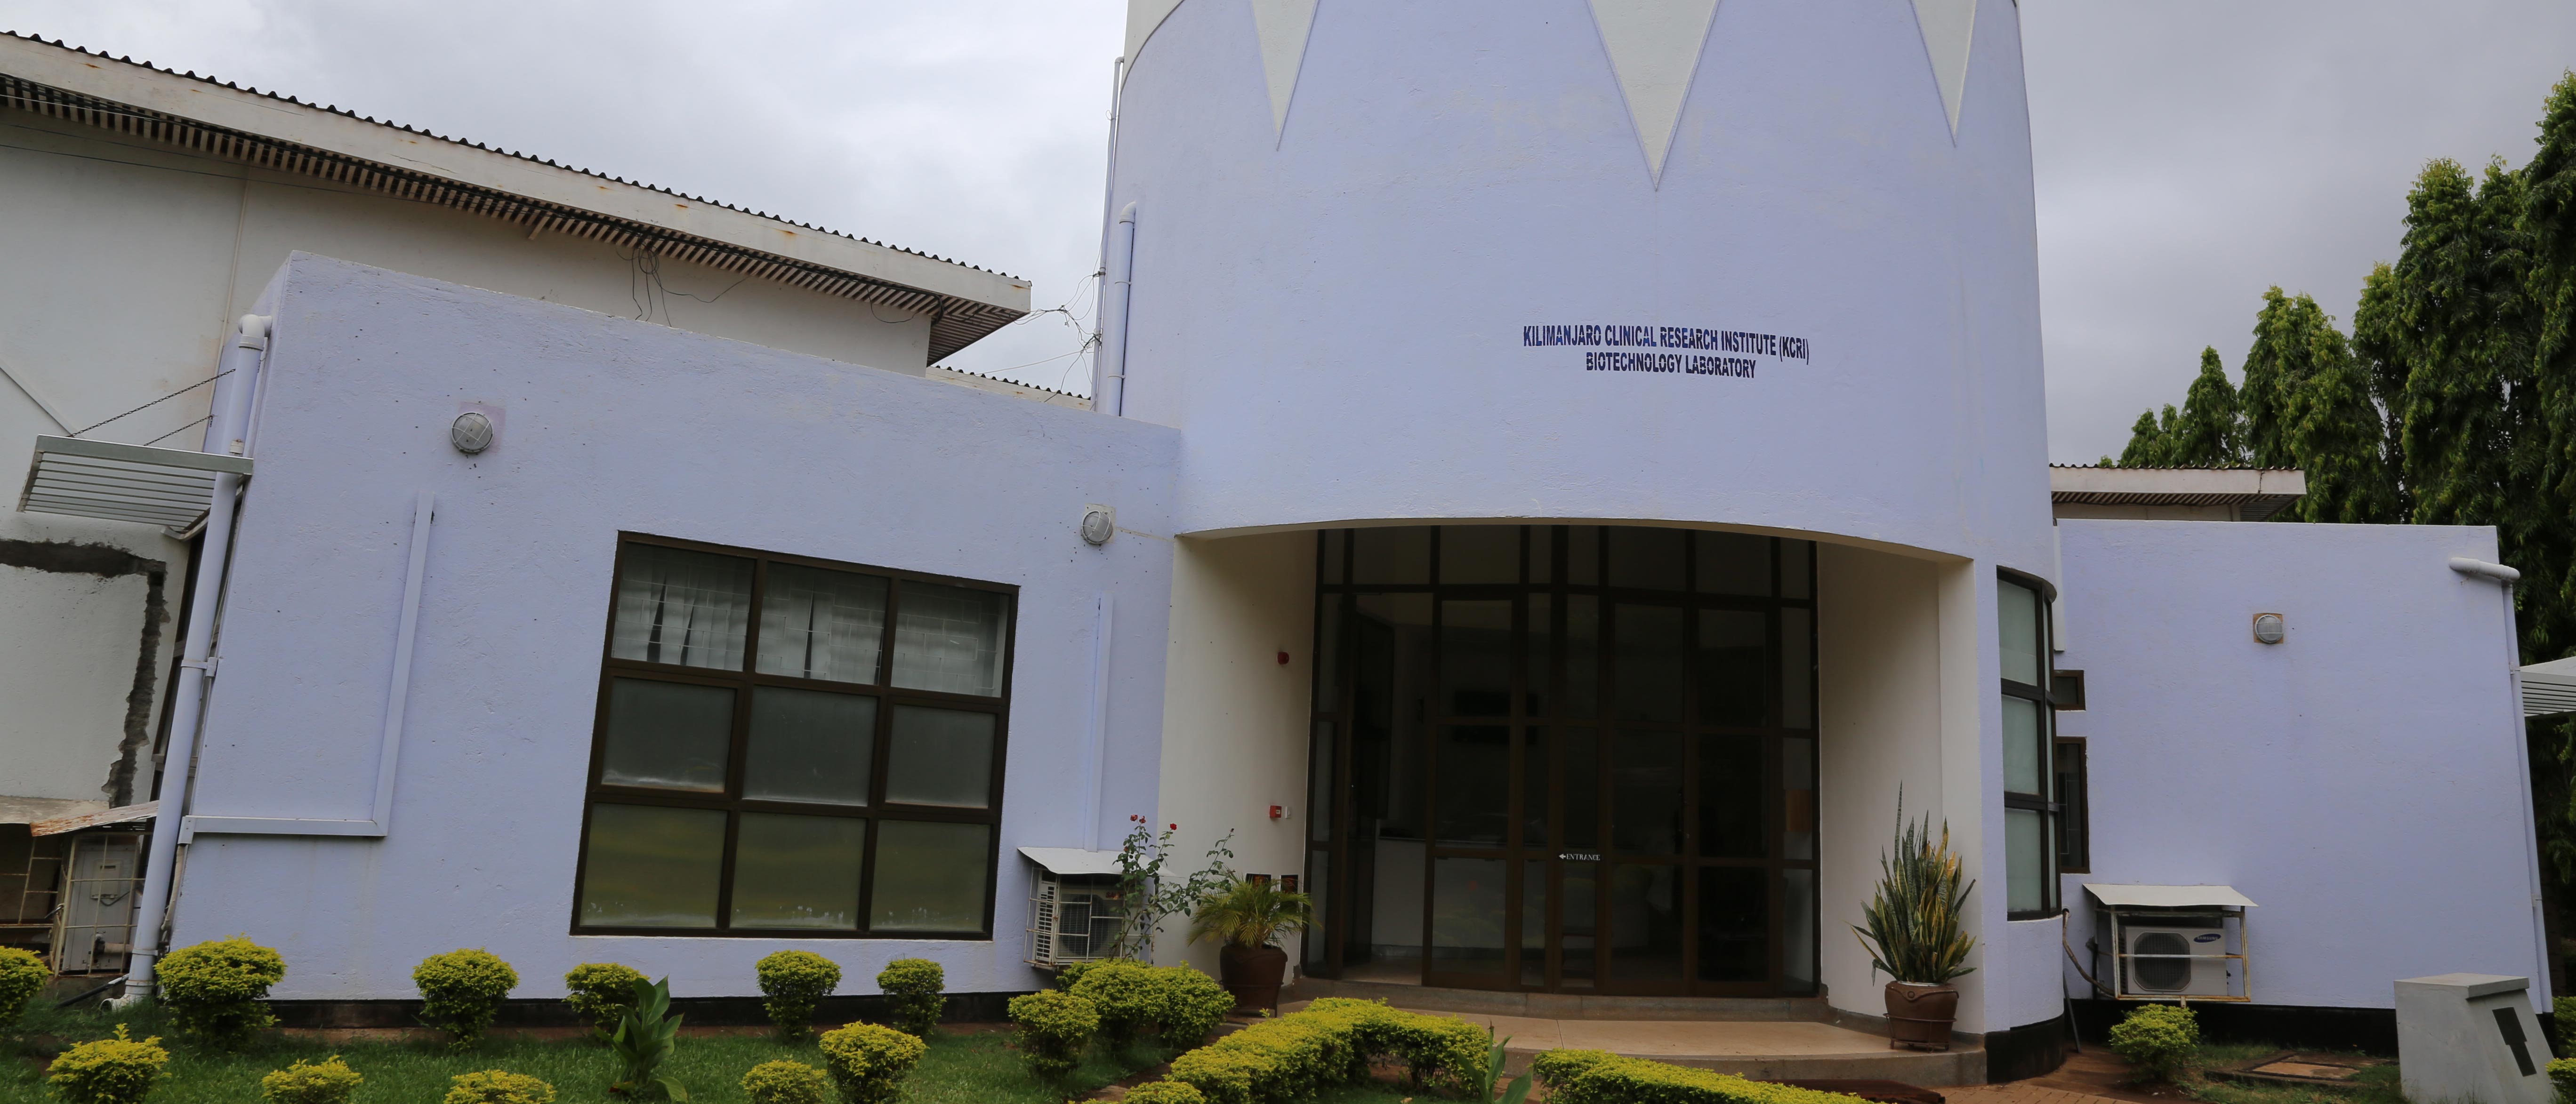 Outside view of the Kilimanjaro Clinical Research Institute, a light blue and white building with grass and plants in front.